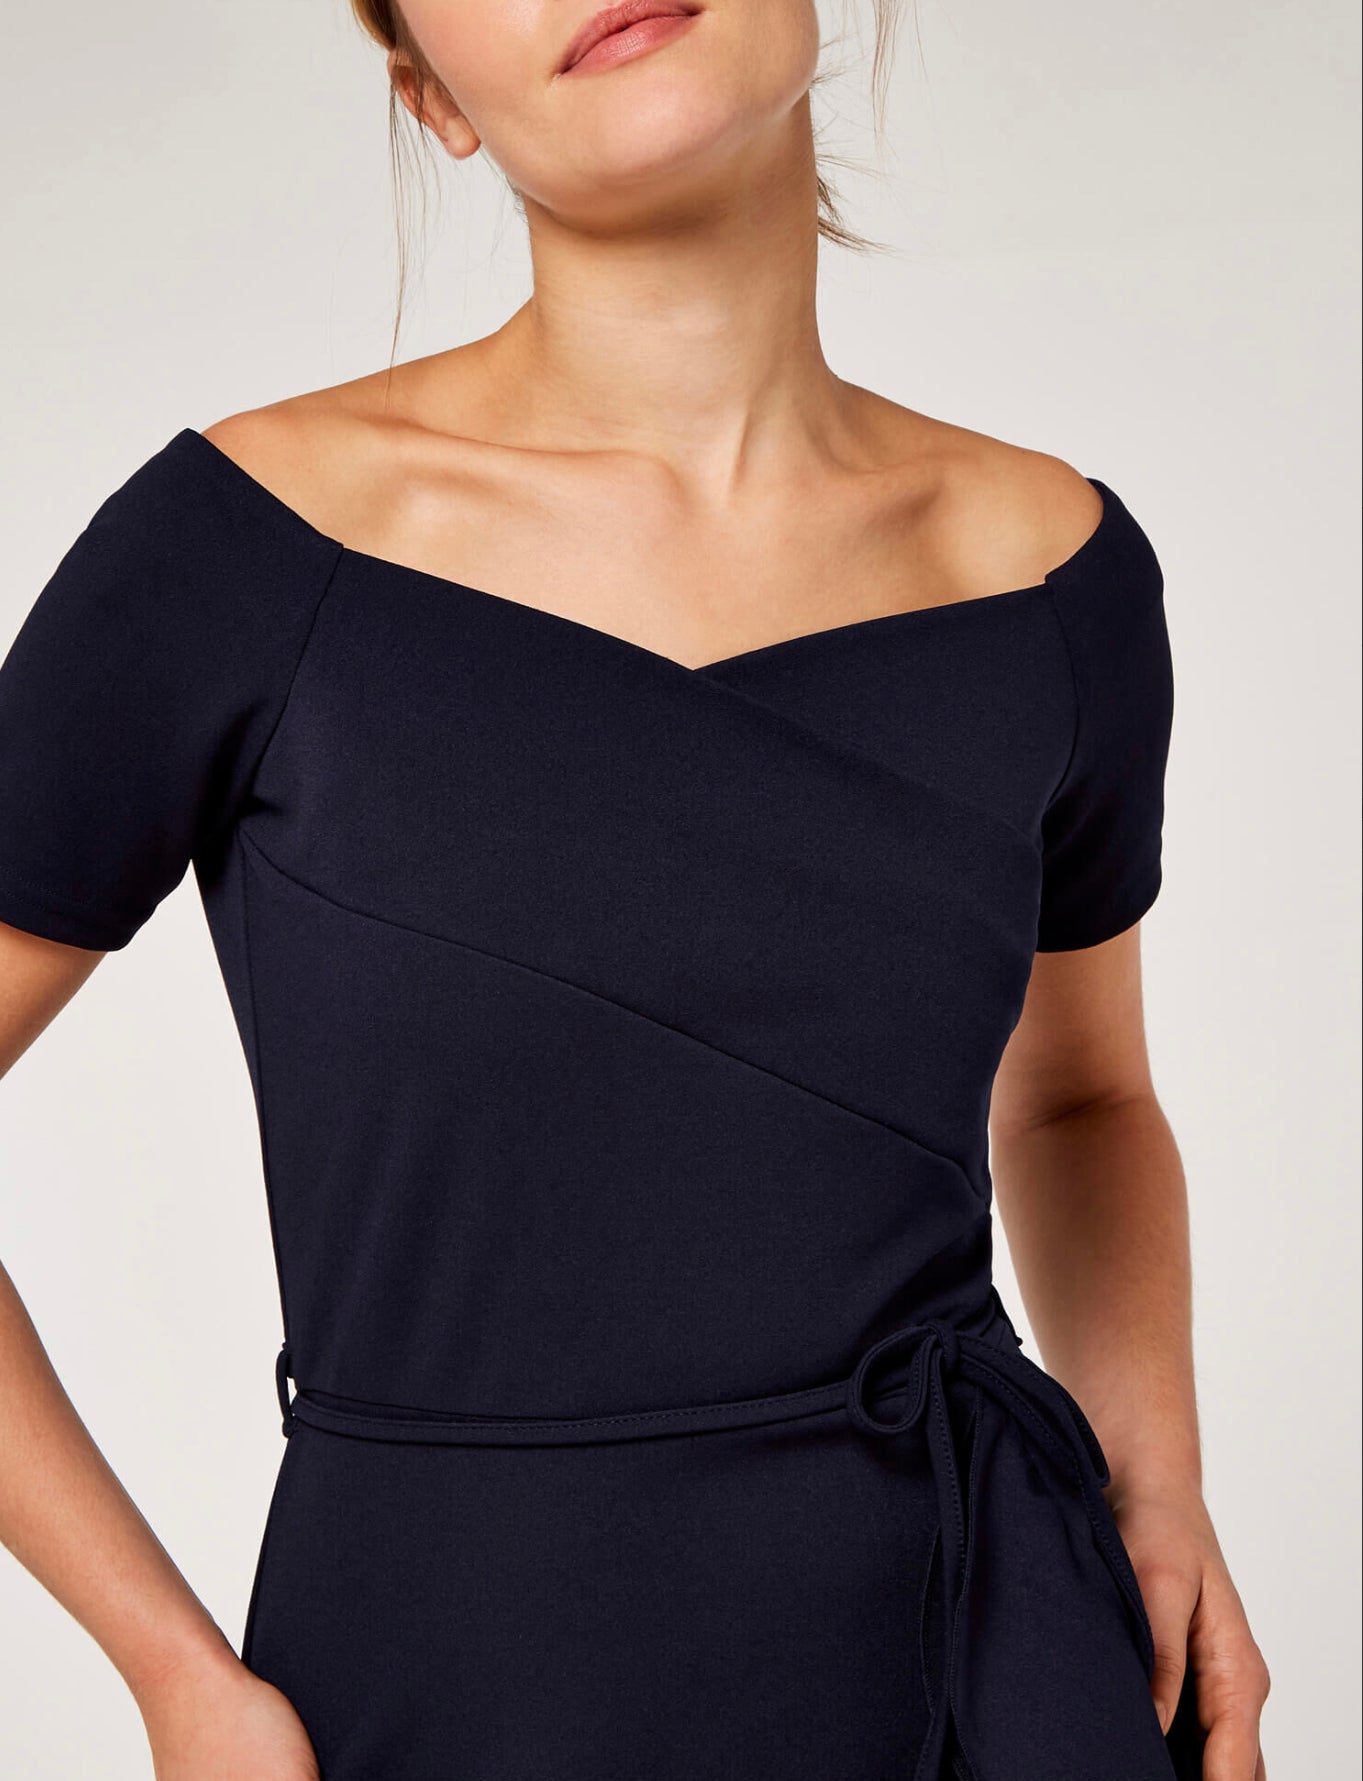 This dress features delicate frills, a romantic Bardot neckline, and a flattering fit.